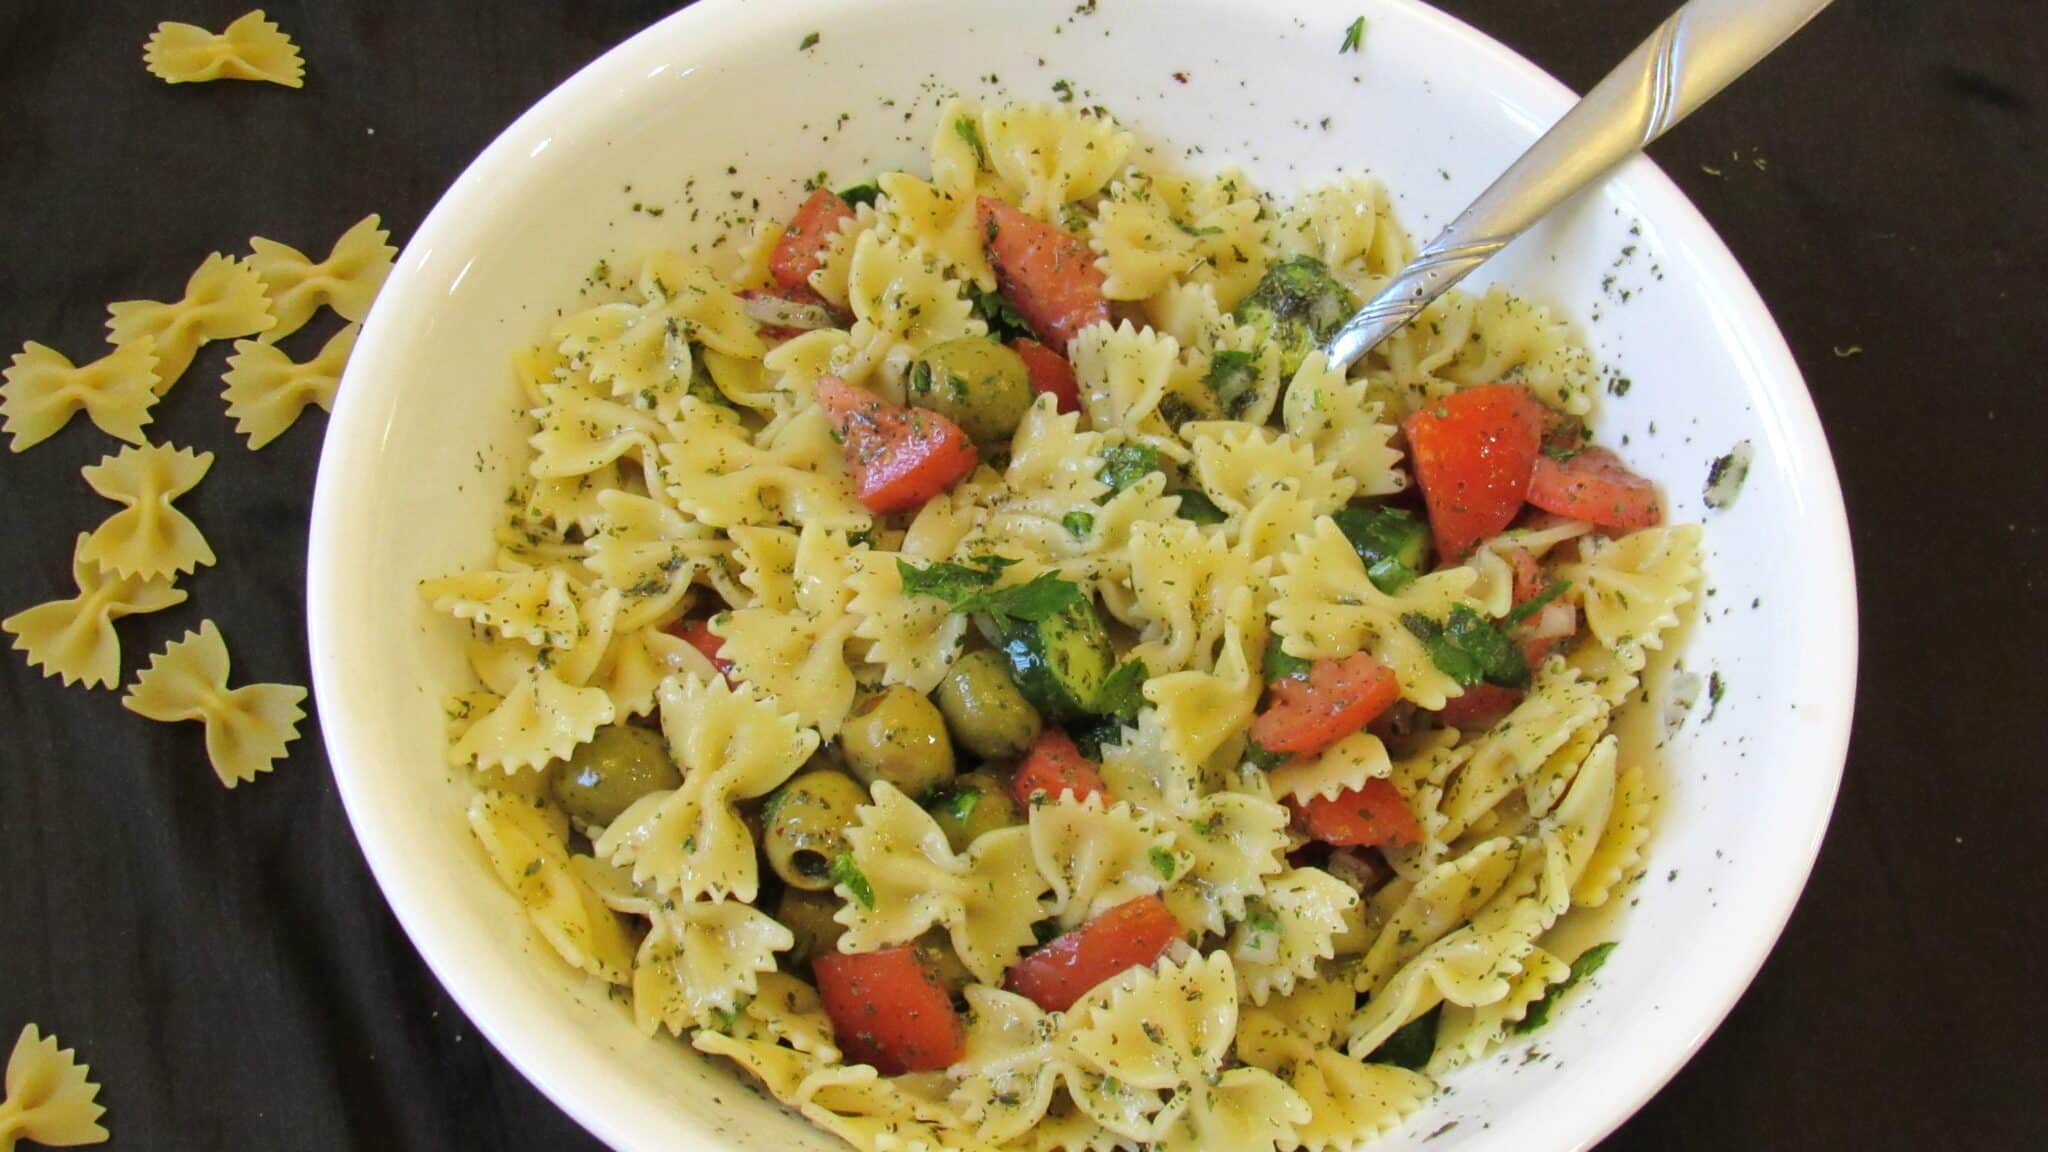 Pasta salad with fresh veggies is served in a white bowl.